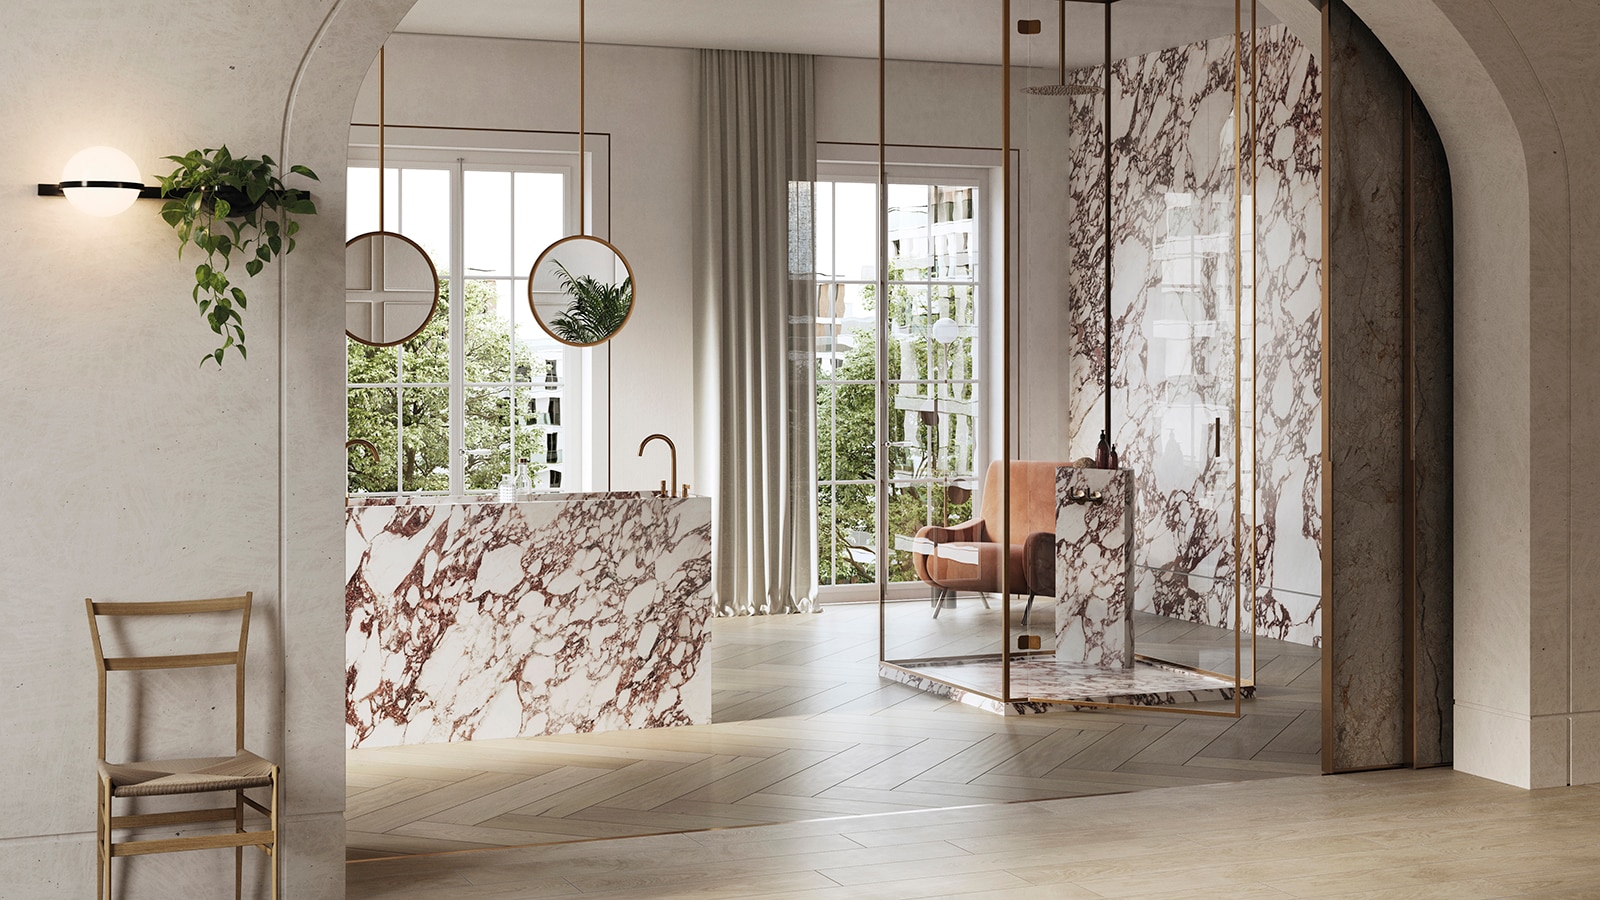 XTONE®: the ideal large format porcelain tile for bathrooms